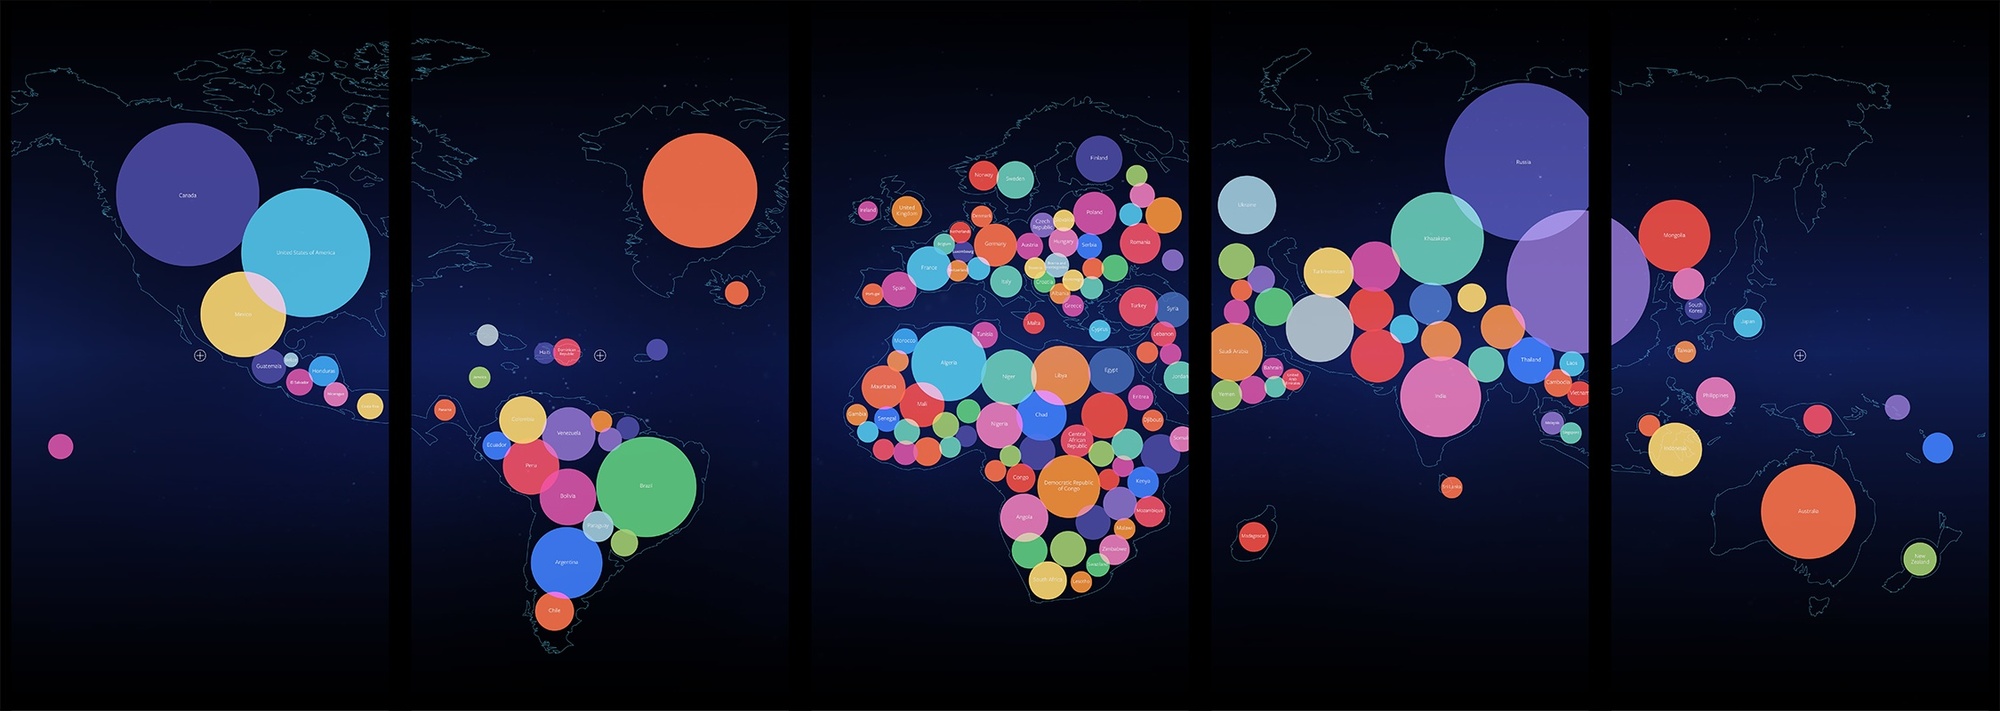 Data visualization circles of varying sizes across the world map